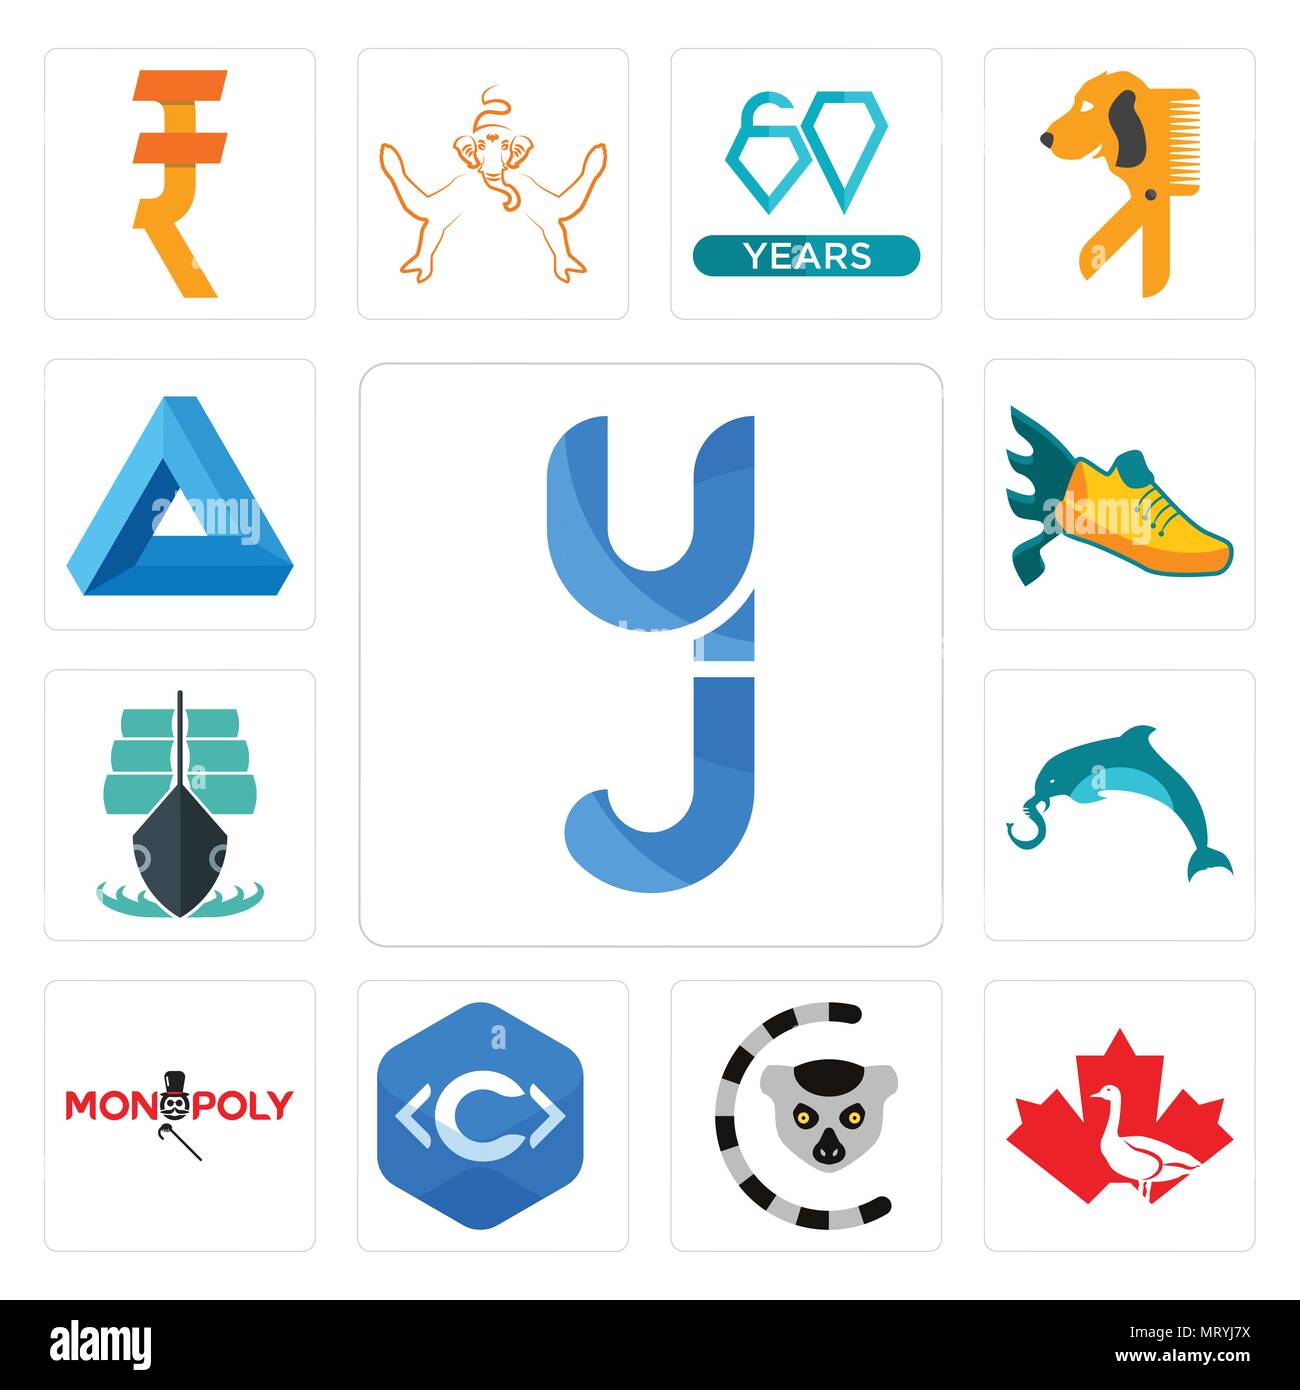 Set Of 13 simple editable icons such as yj, canada goose, lemur, c language, monopoly, elephand dolphin, tall ship, flying shoe, penrose triangle can  Stock Vector